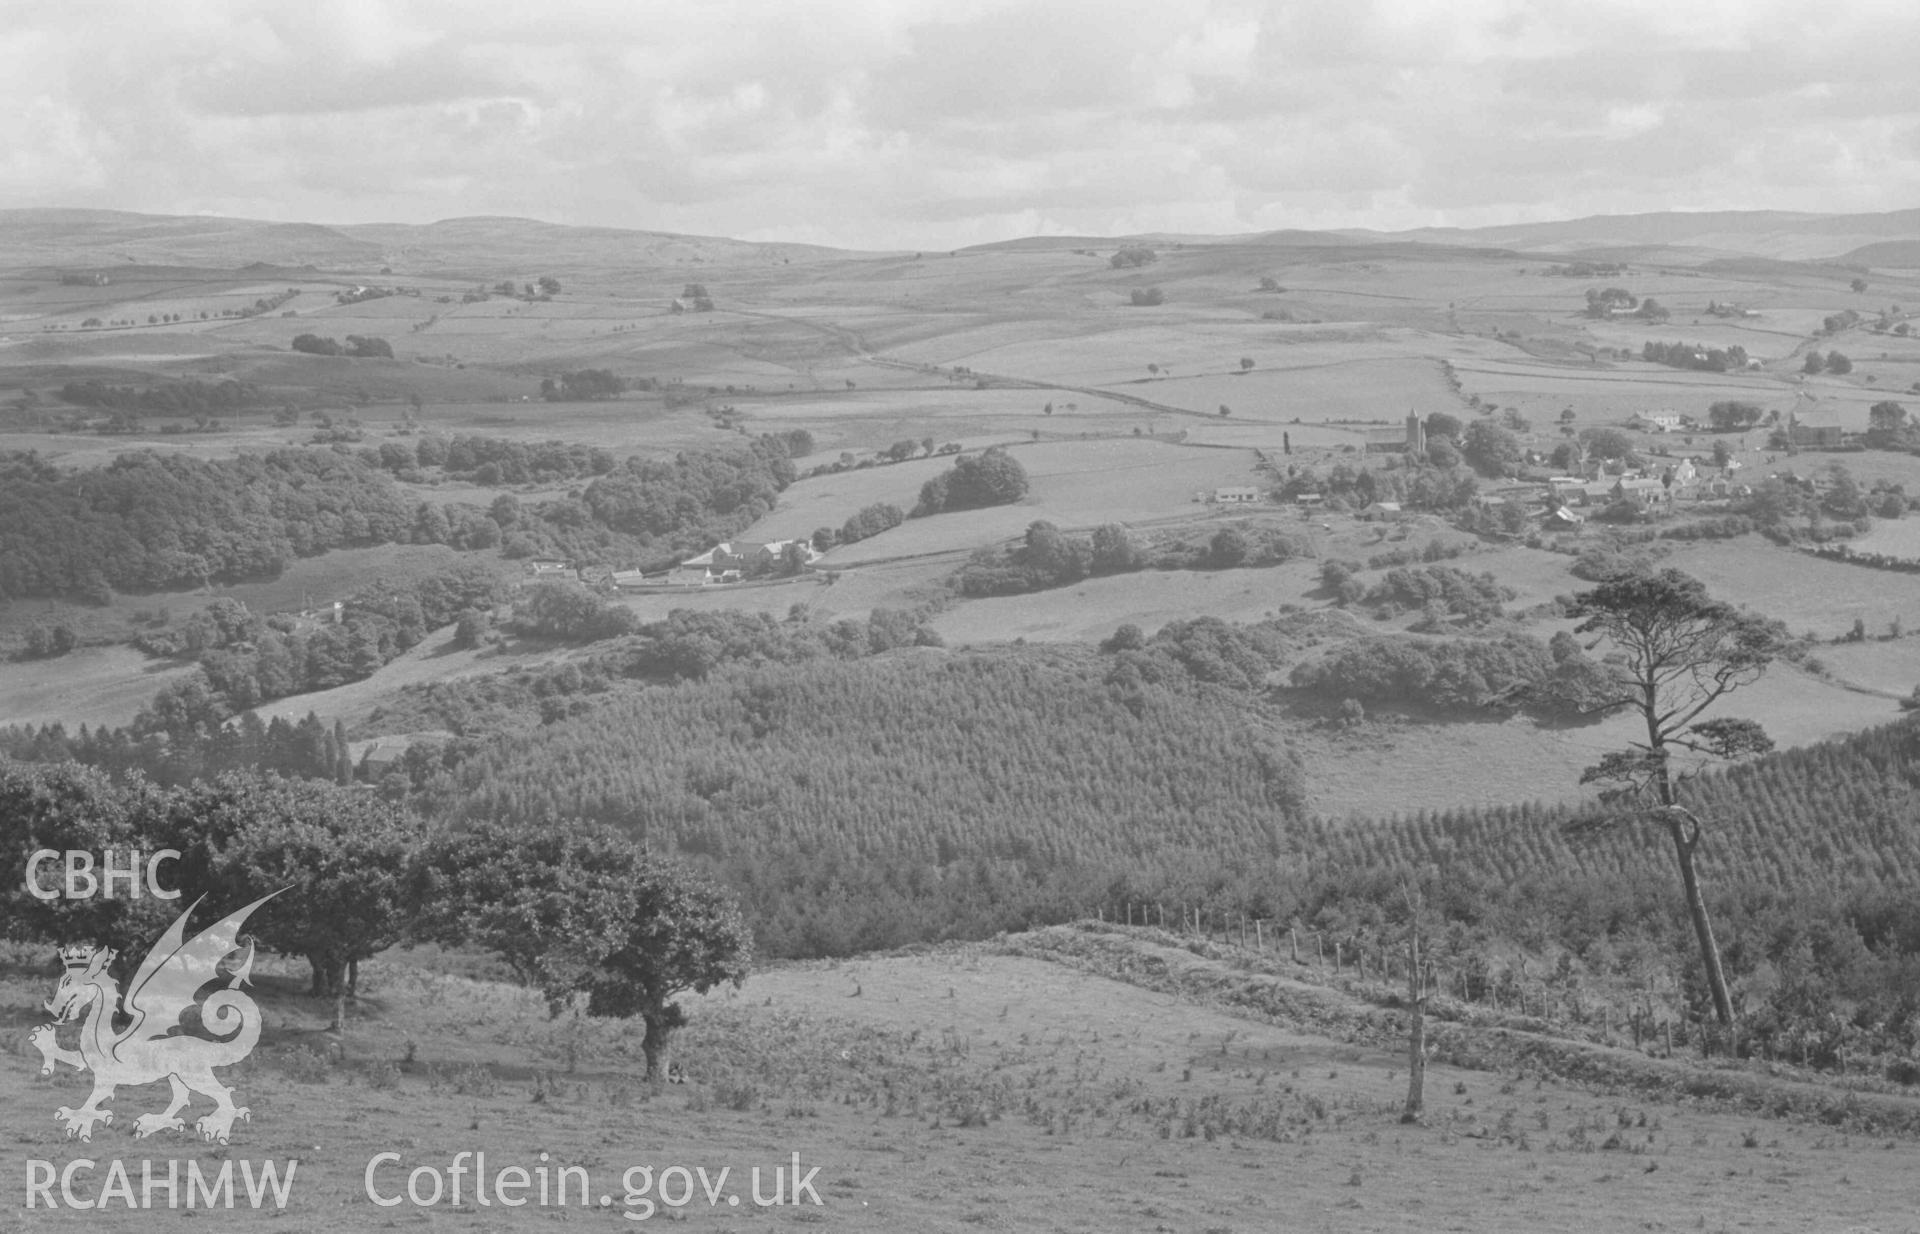 Digital copy of a black and white negative showing panoramic view of Castell Grogwynion, Ystwyth Valley and Ysbyty Ystwyth from the 1007ft summit above Maen Arthur (6/6). Photographed by Arthur Chater on 17 August 1968. Looking from west to south east, from Grid Reference SN 725 729.